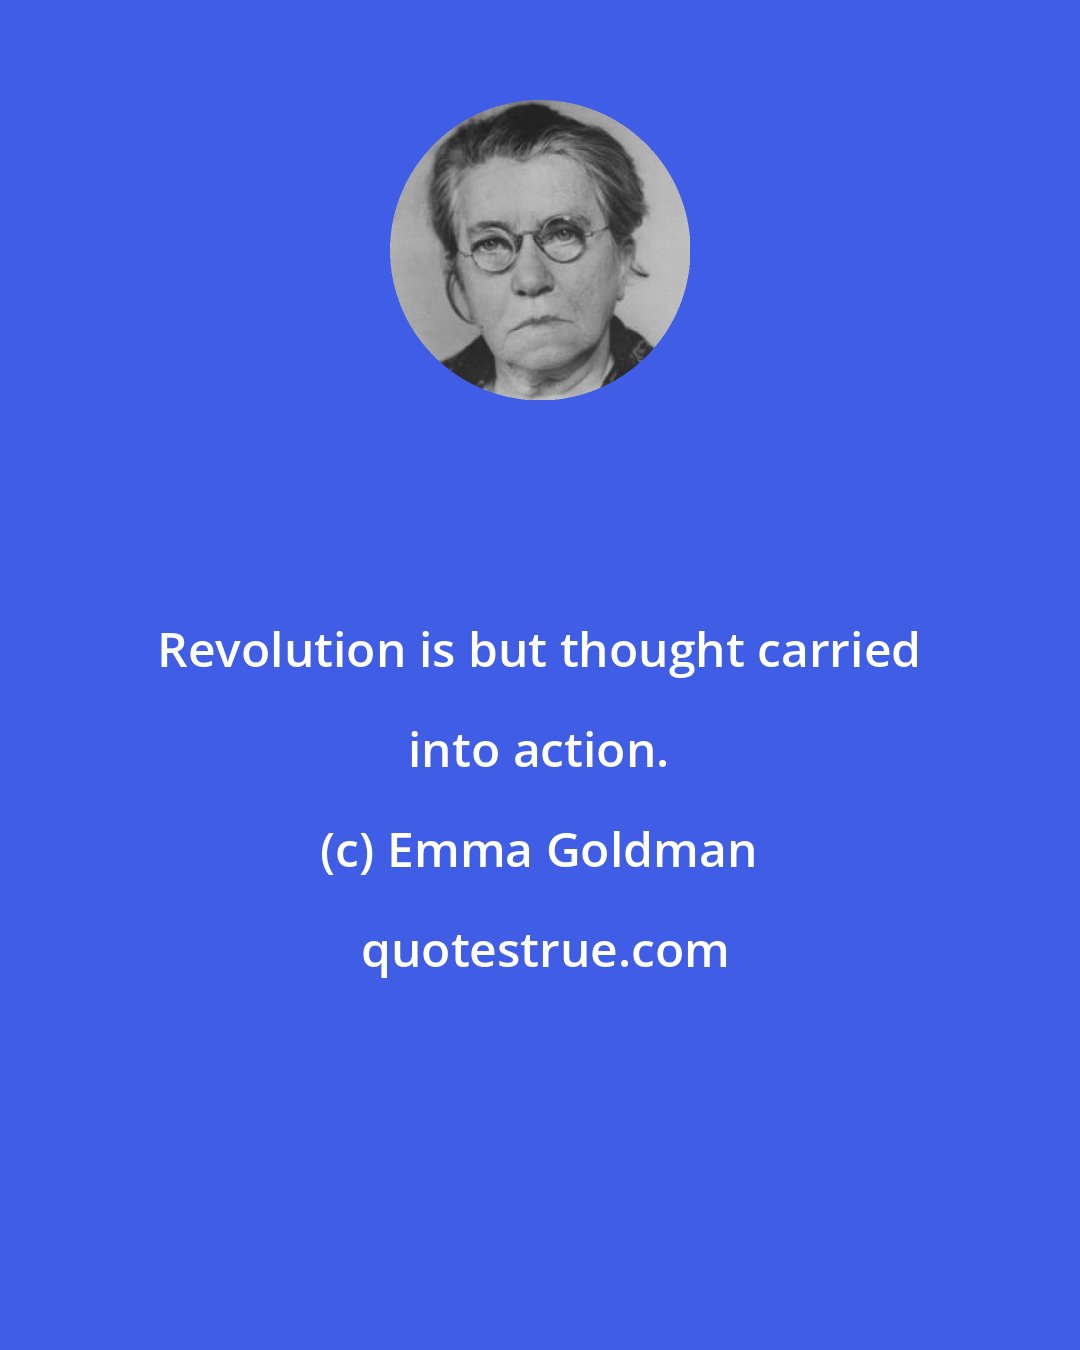 Emma Goldman: Revolution is but thought carried into action.